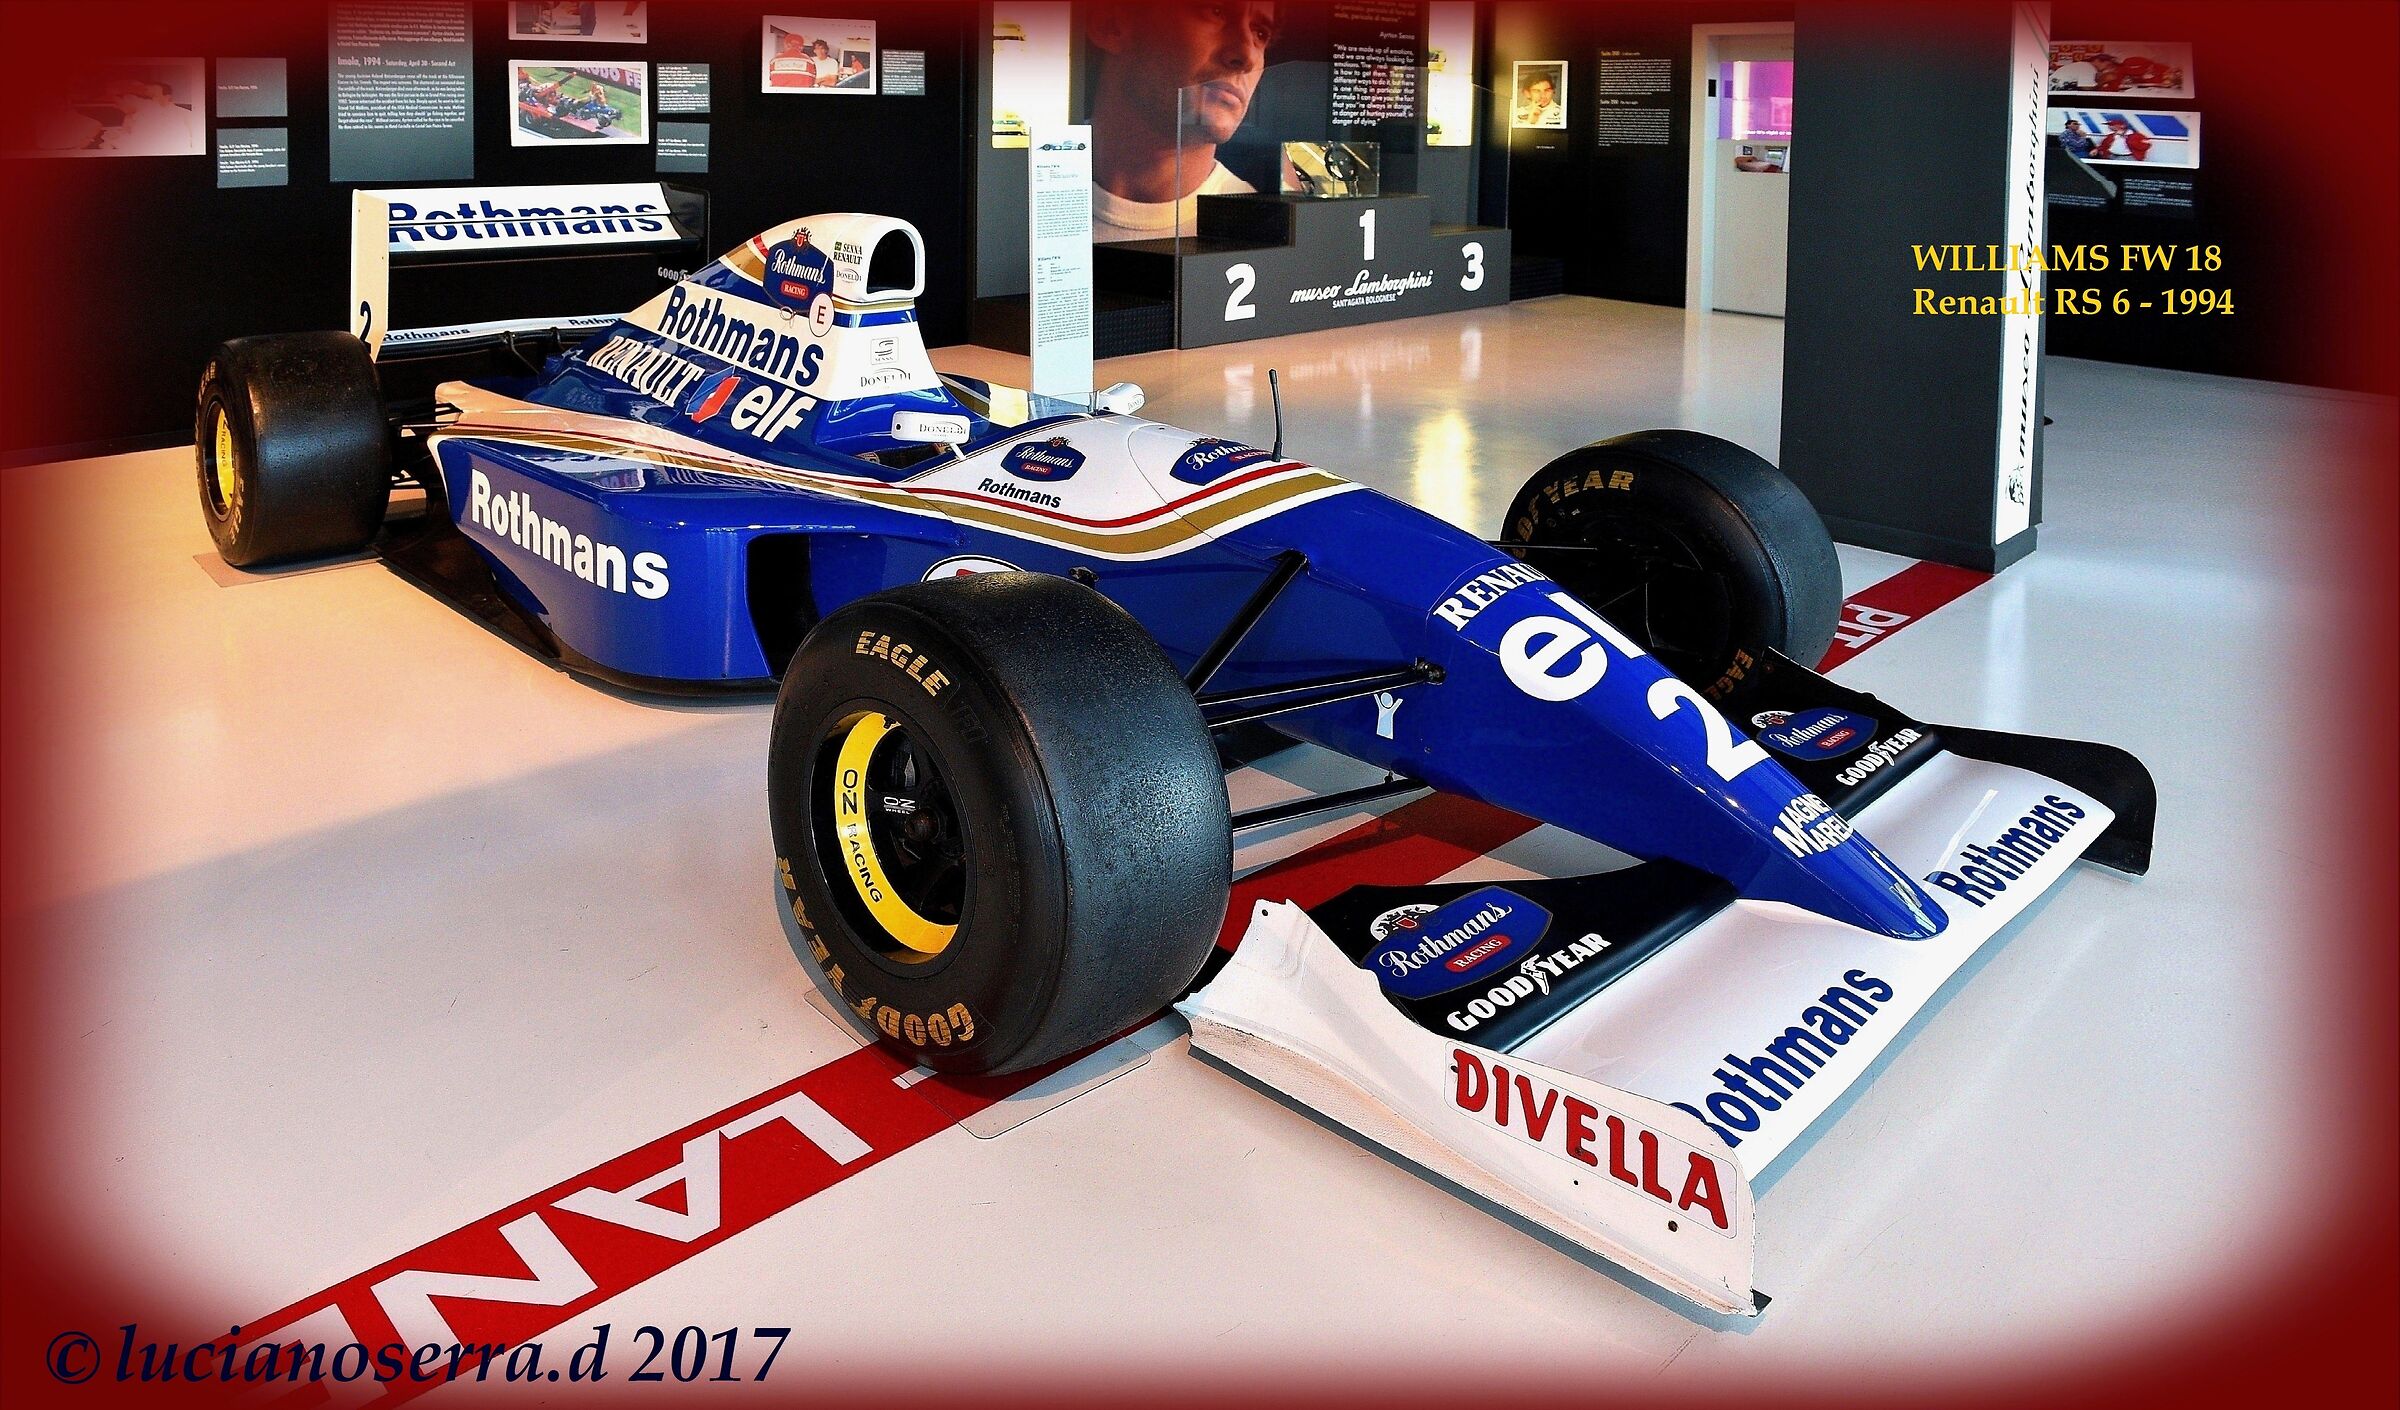 Williams FW 16 Renault RS 6-1994...